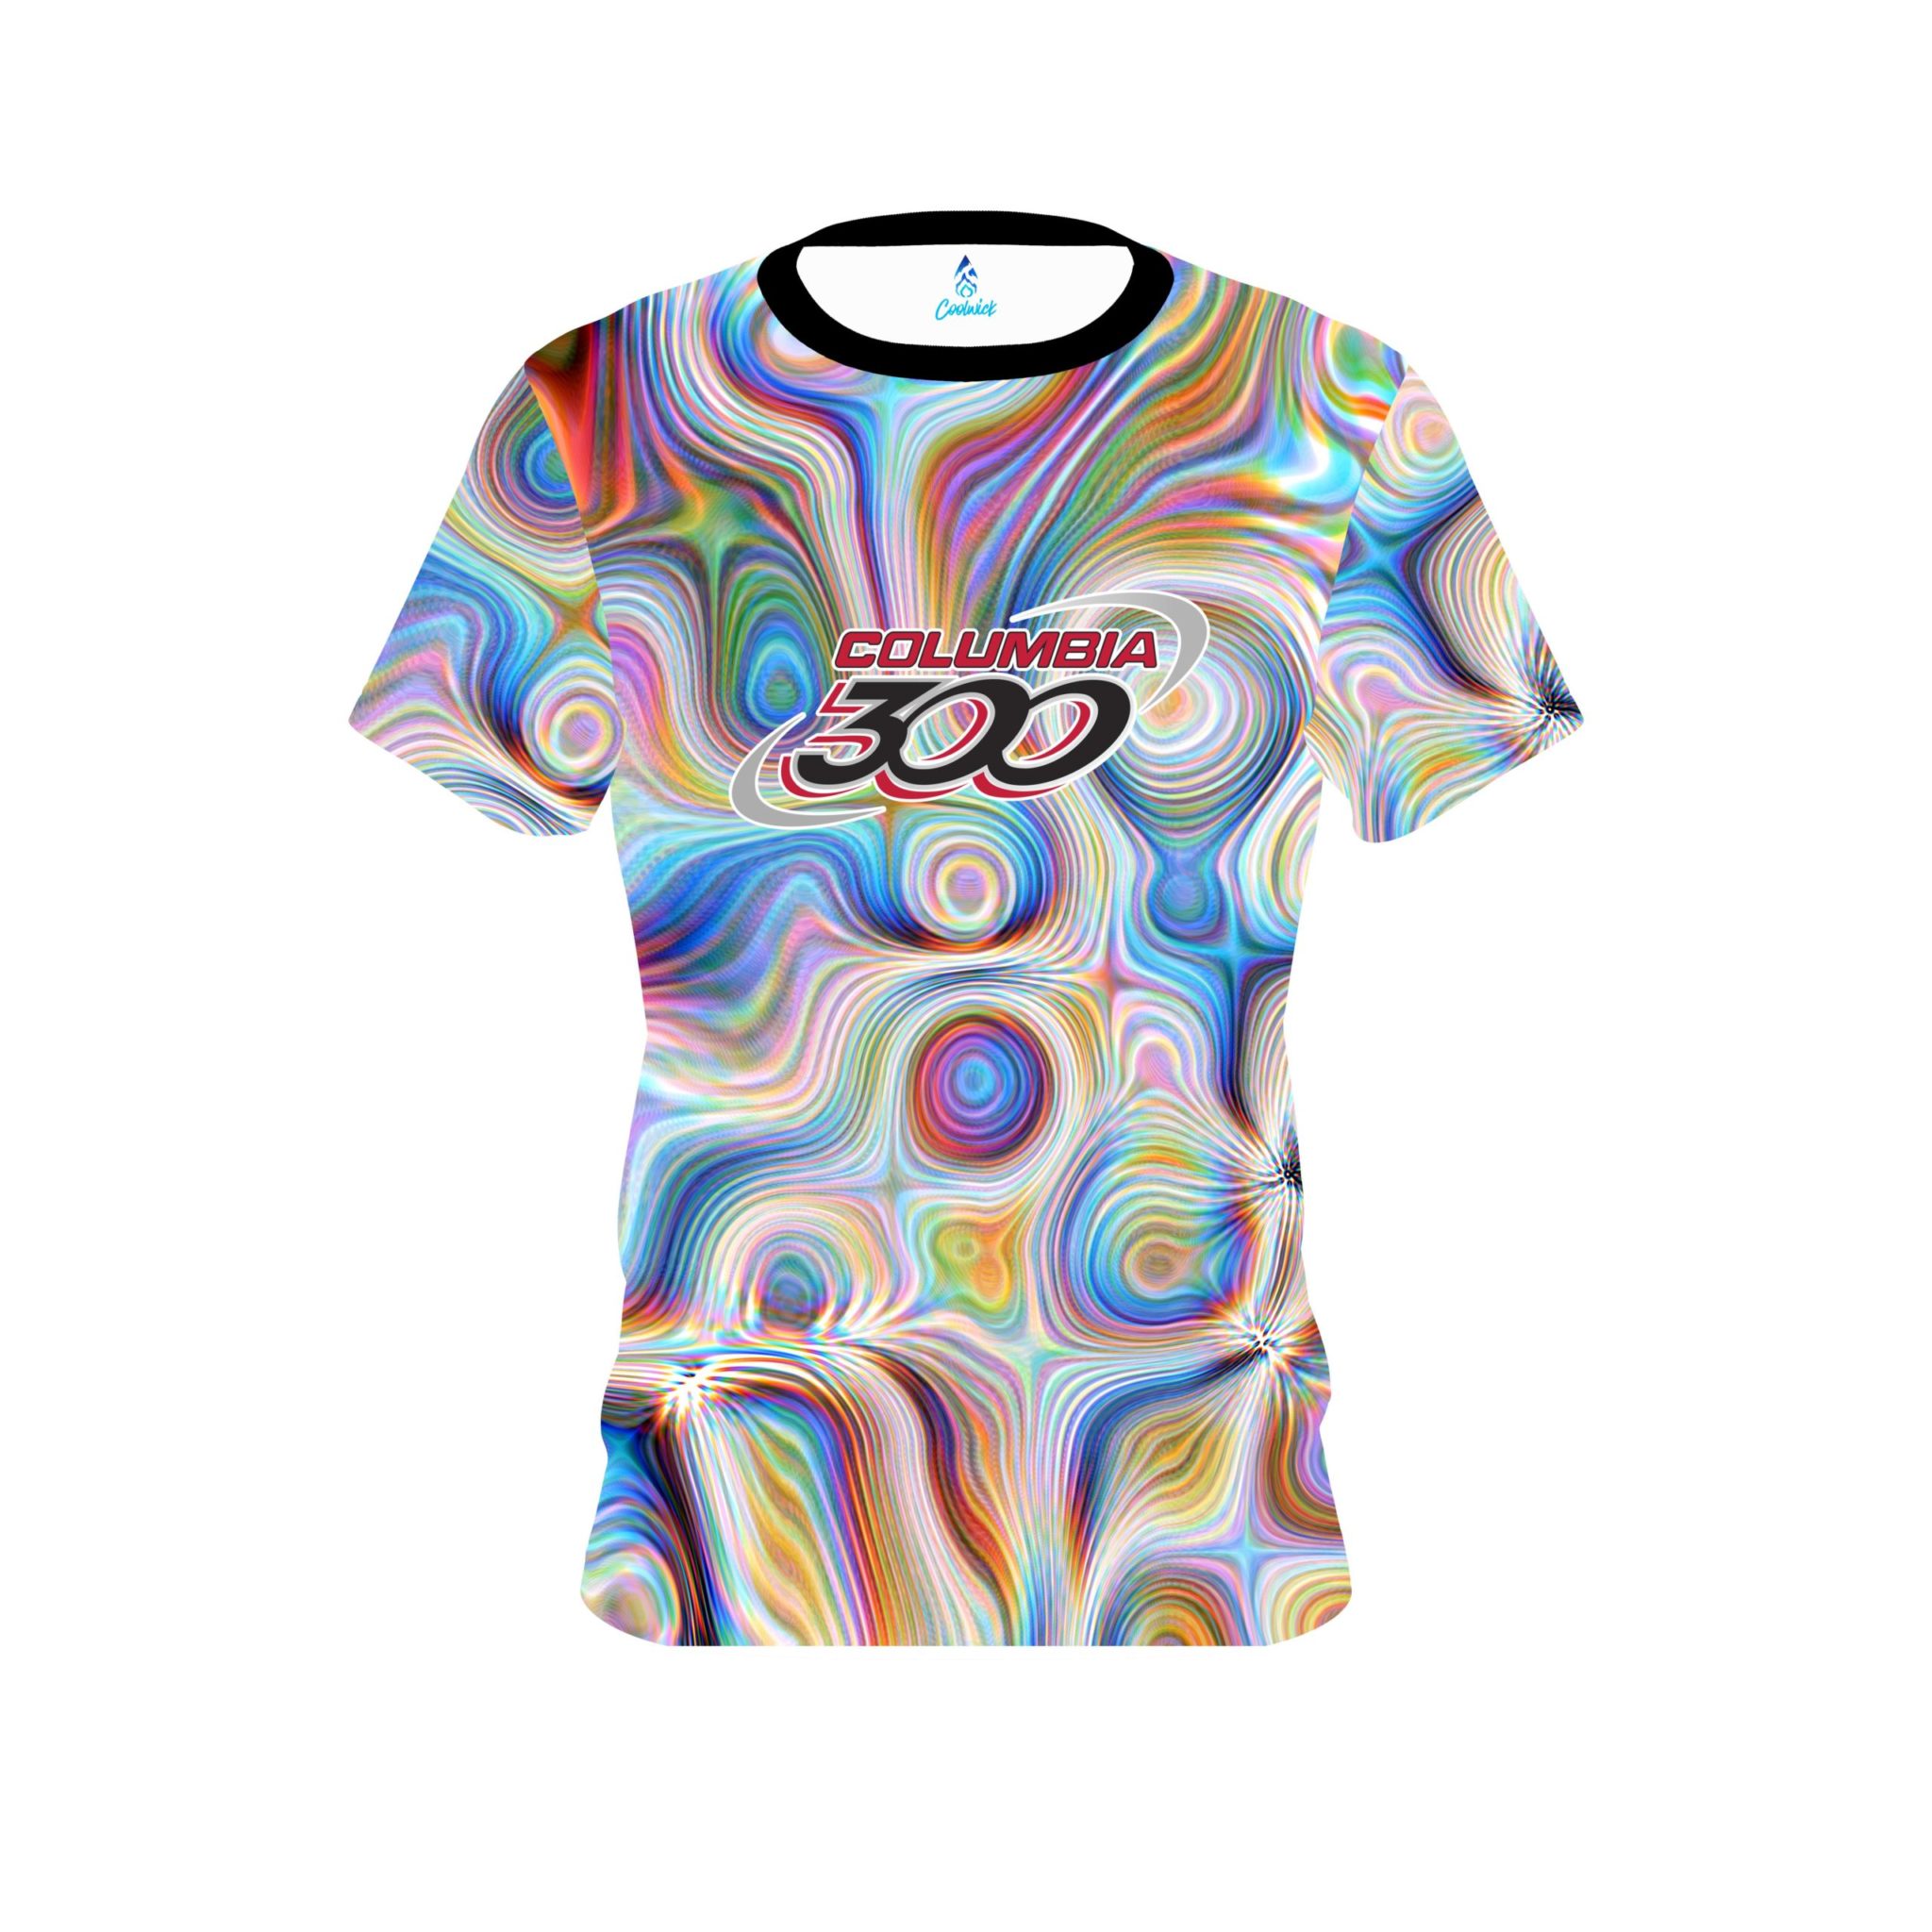 Columbia 300 Rainbow Hallucinate CoolWick Bowling Jersey